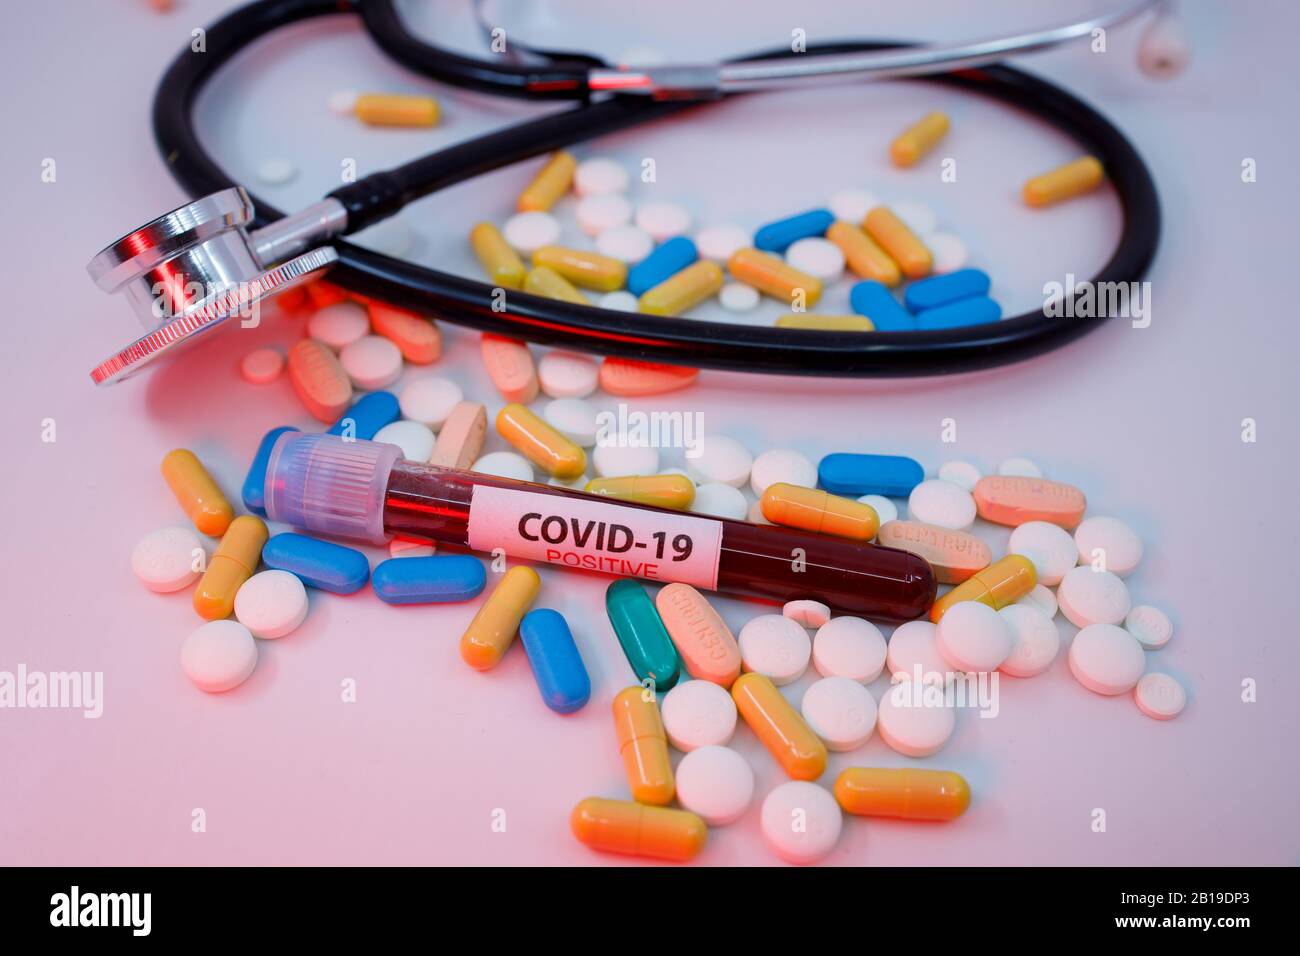 Blood test tube for the new rapidly spreading Coronavirus that originated in Wuhan, China on a big pile of different type of pills Stock Photo